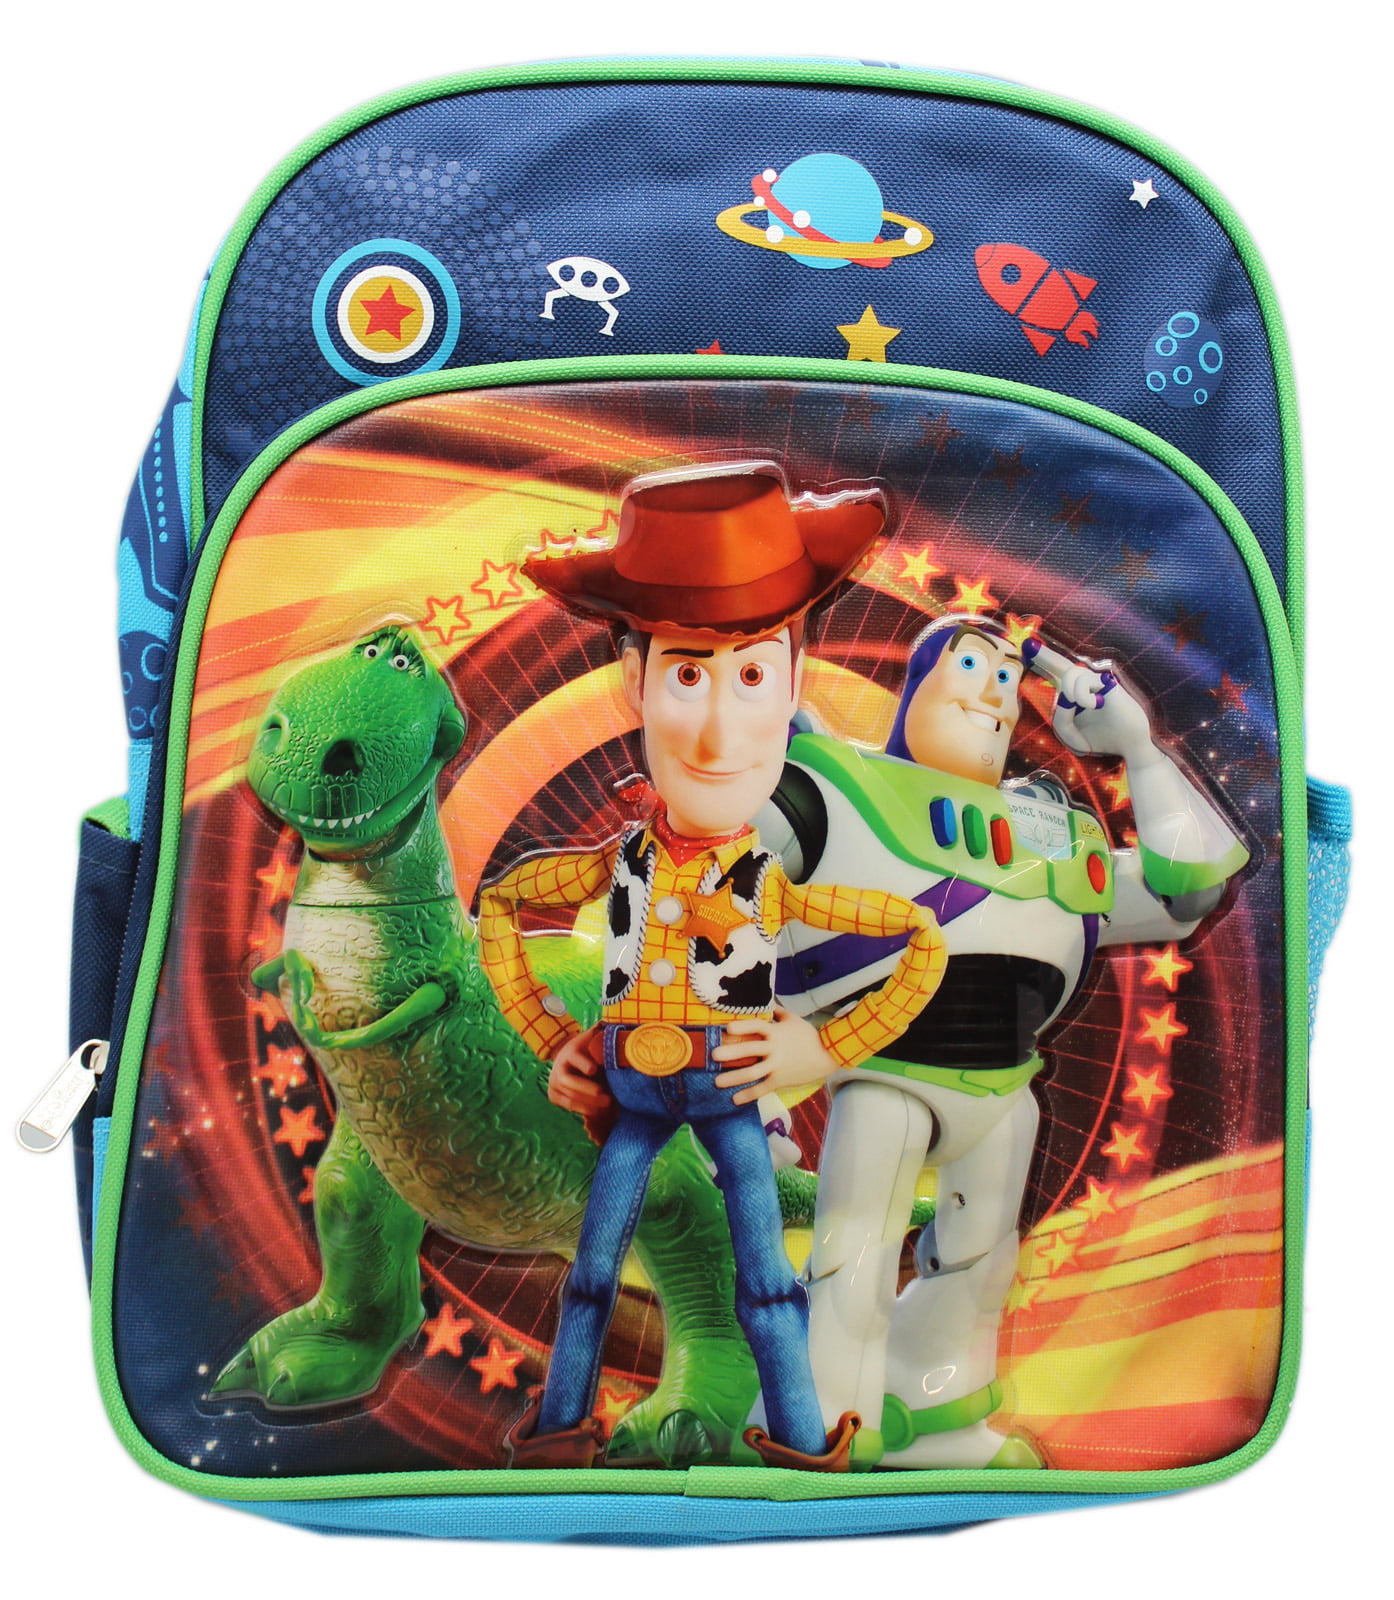 Toy Story 4 Woody Buzz Rex Forky 12 inches Toddler Backpack 